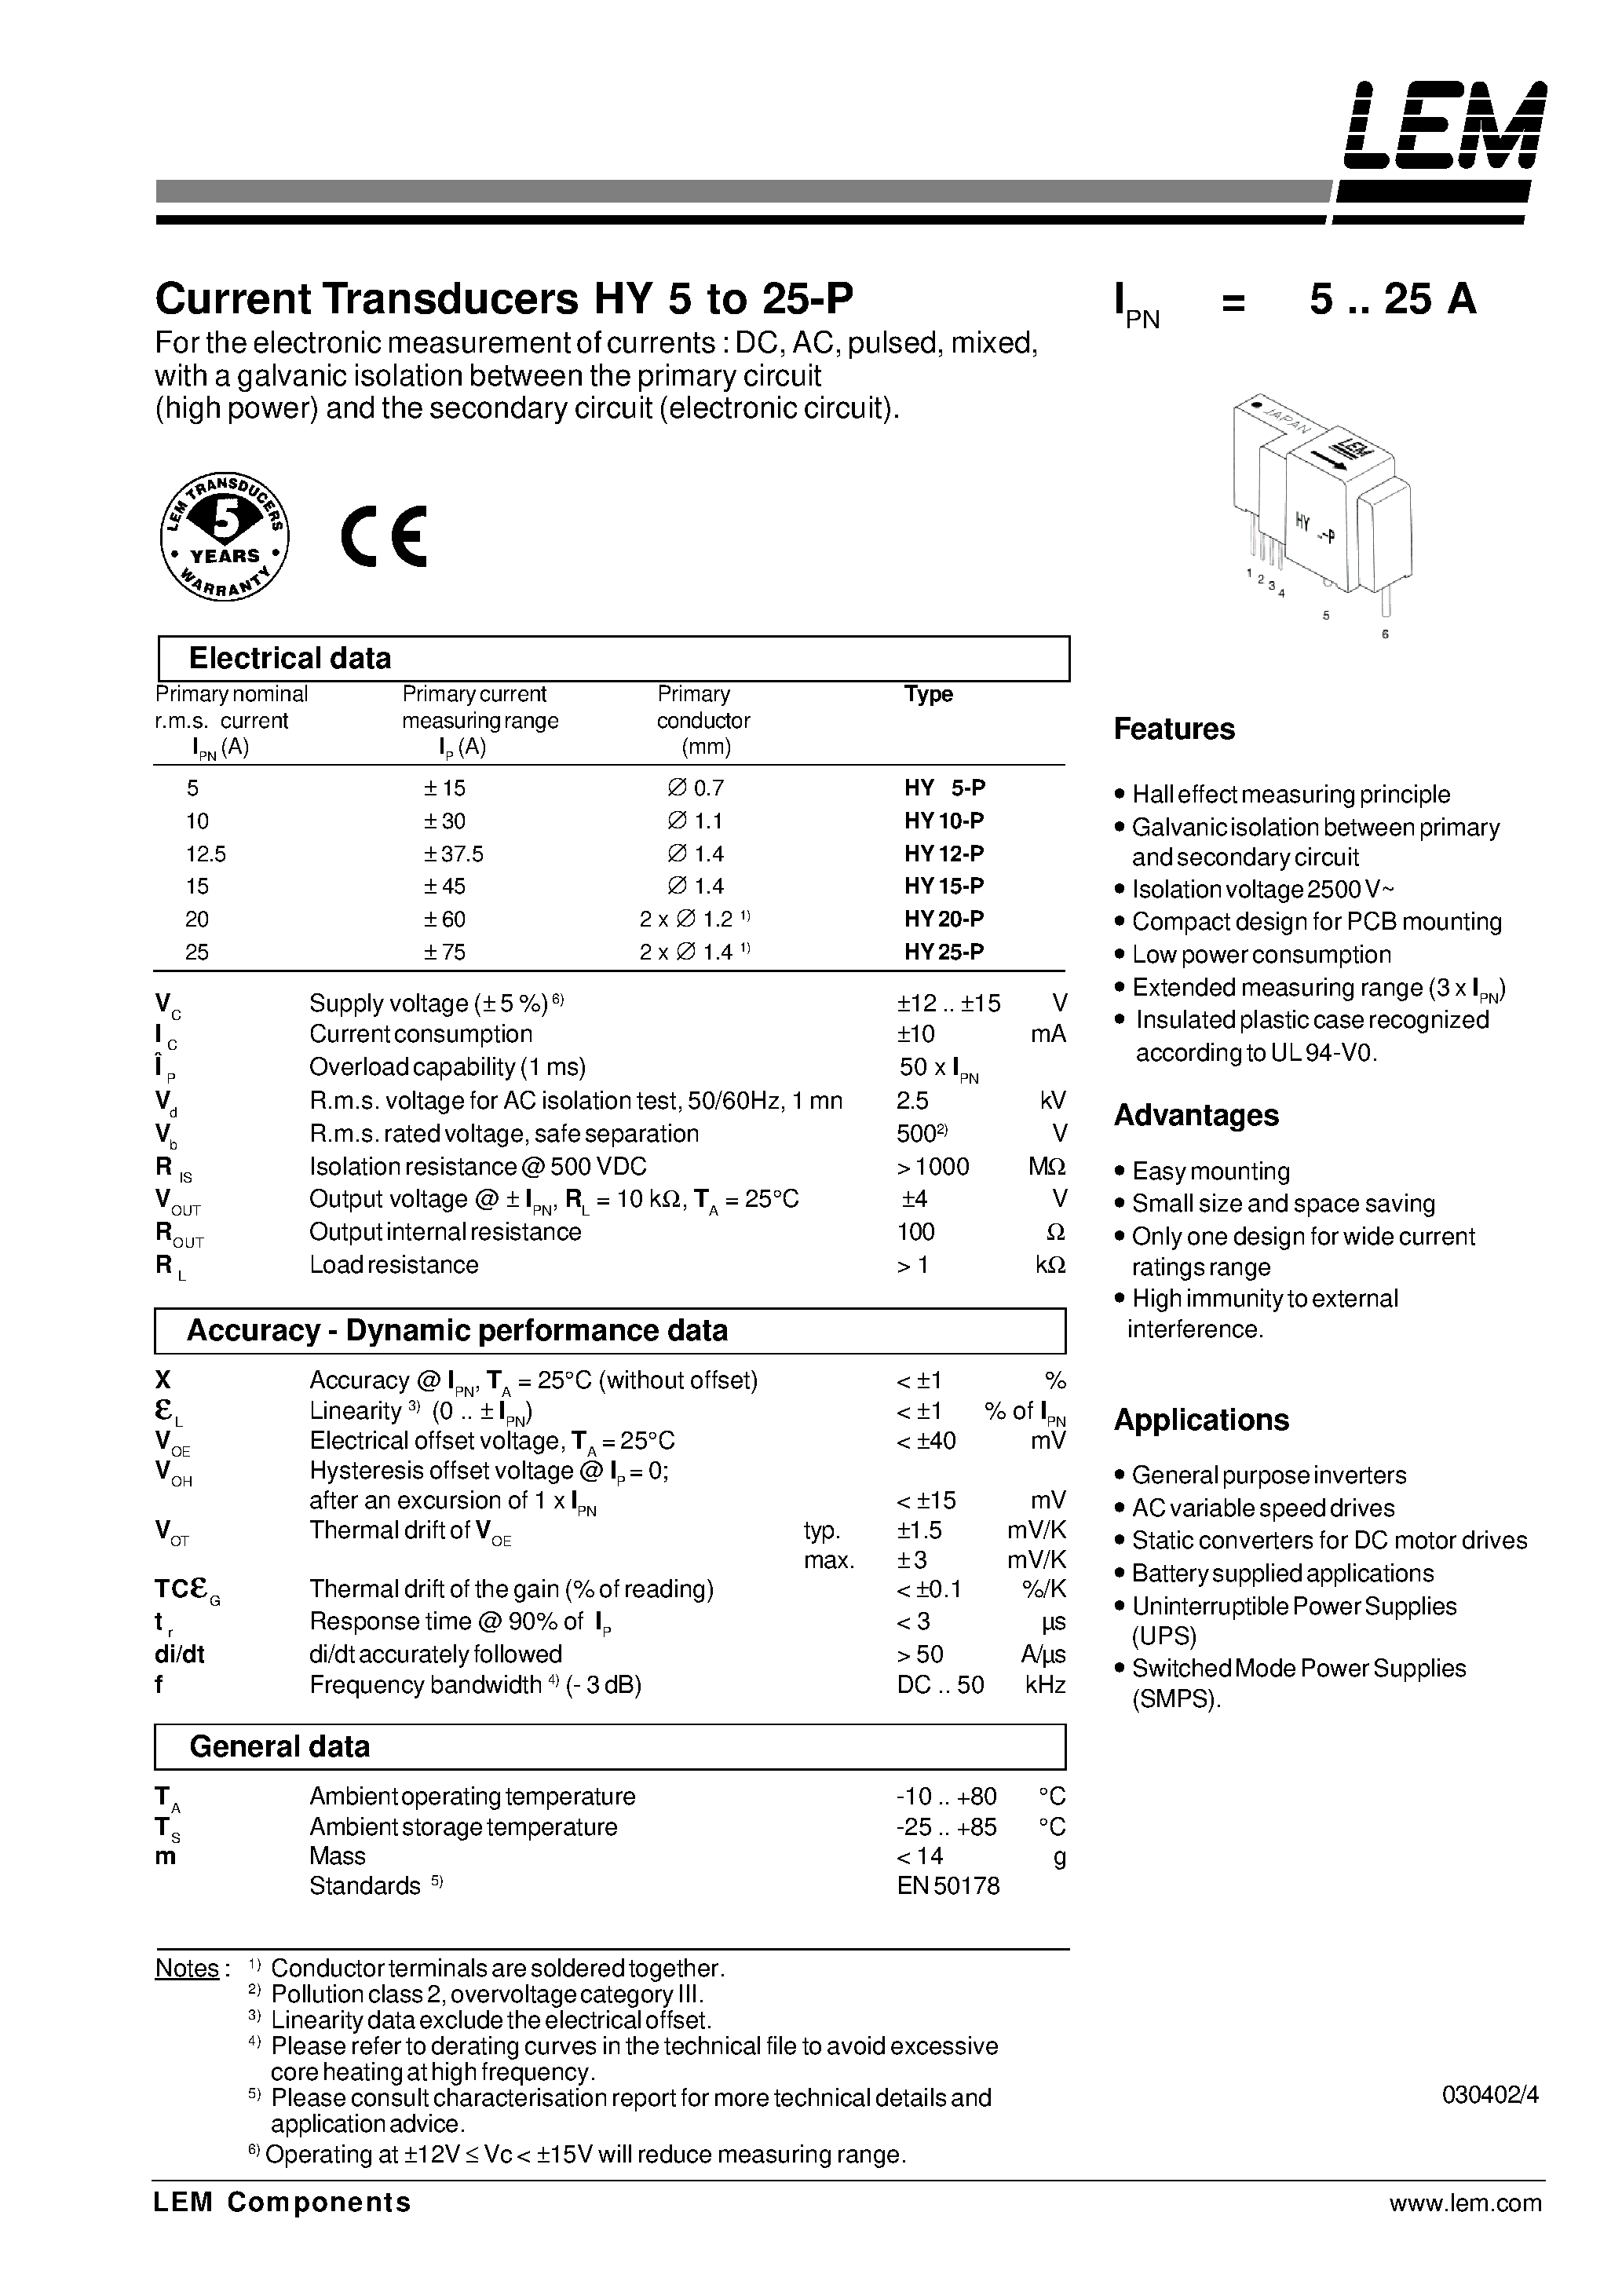 Datasheet HY10-P - Current Transducers HY 5 to 25-P page 1